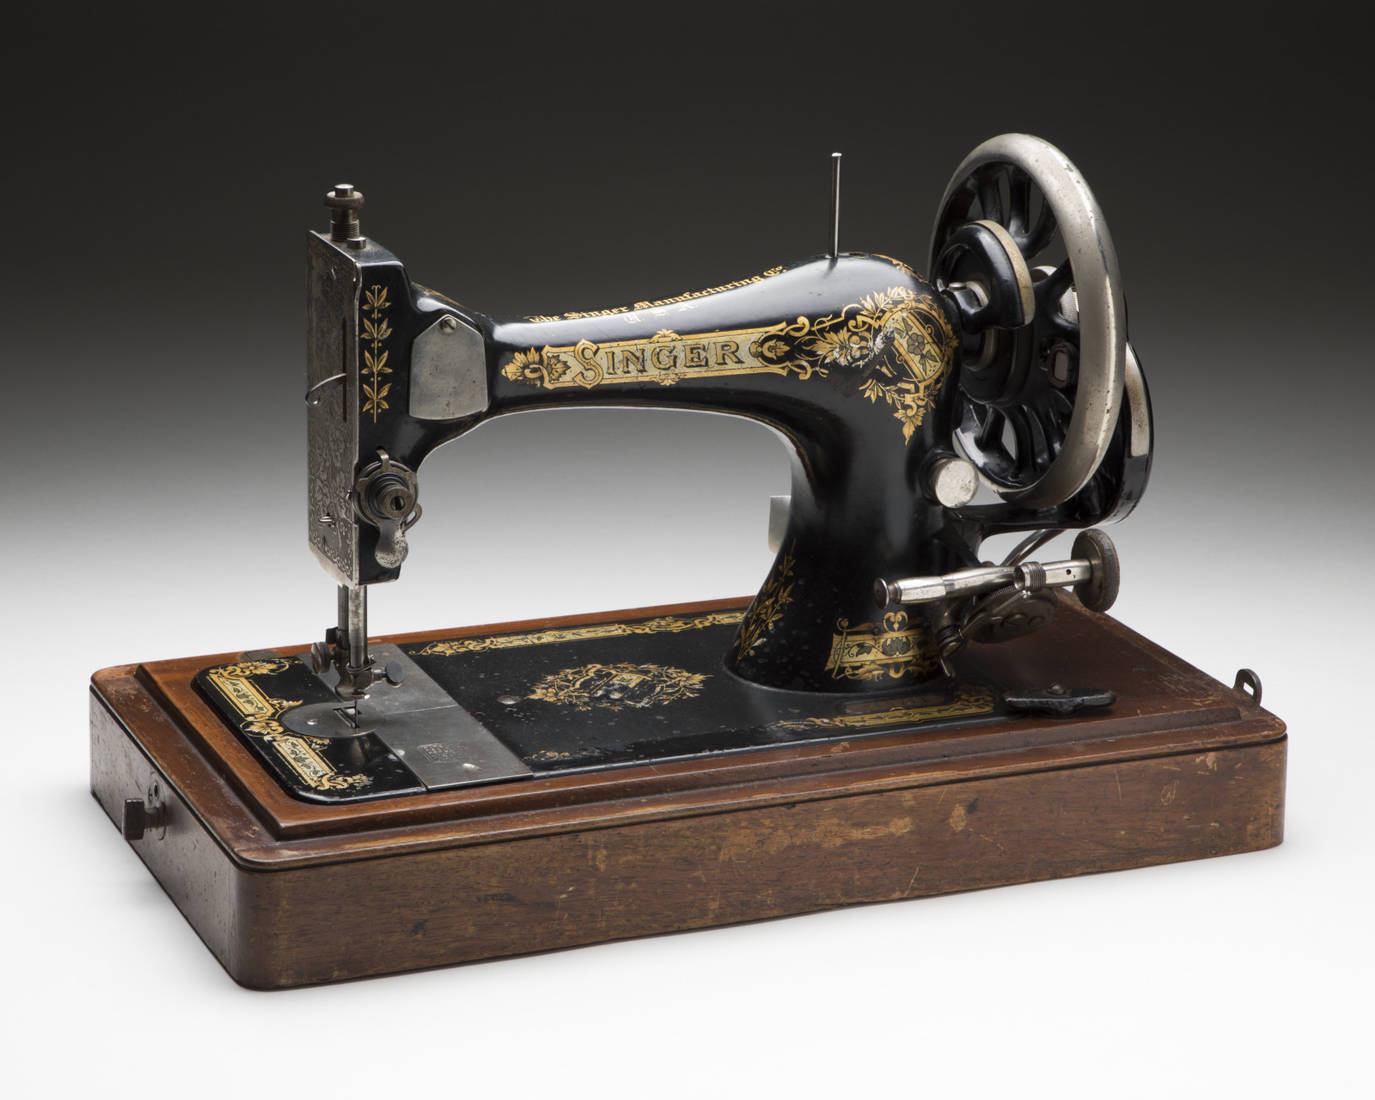 Hand-operated Singer sewing machine, black with gold floral motifs.